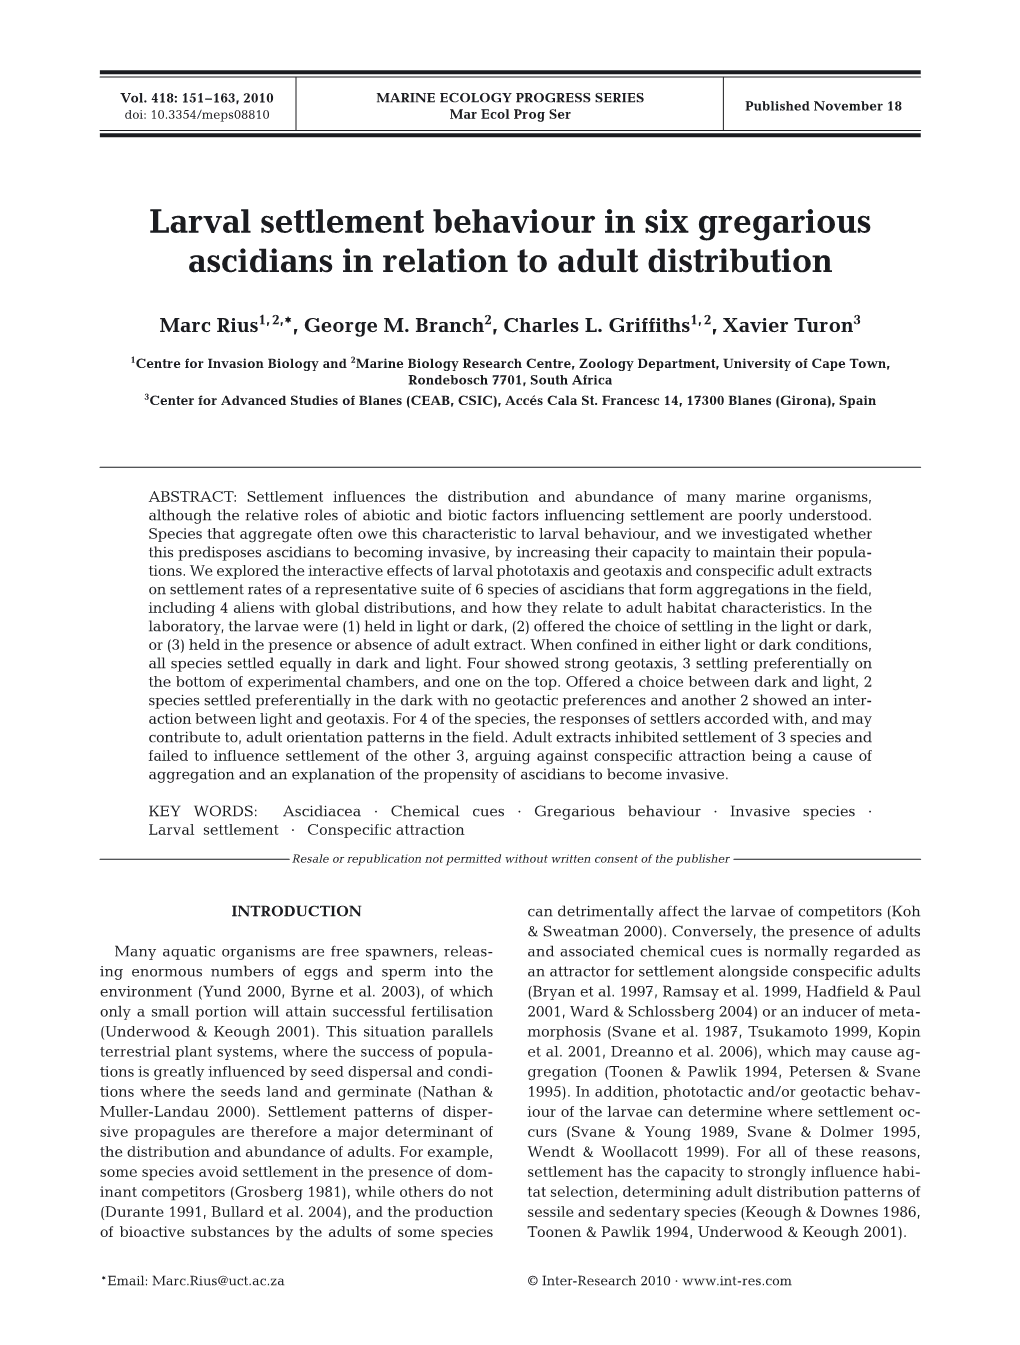 Larval Settlement Behaviour in Six Gregarious Ascidians in Relation to Adult Distribution